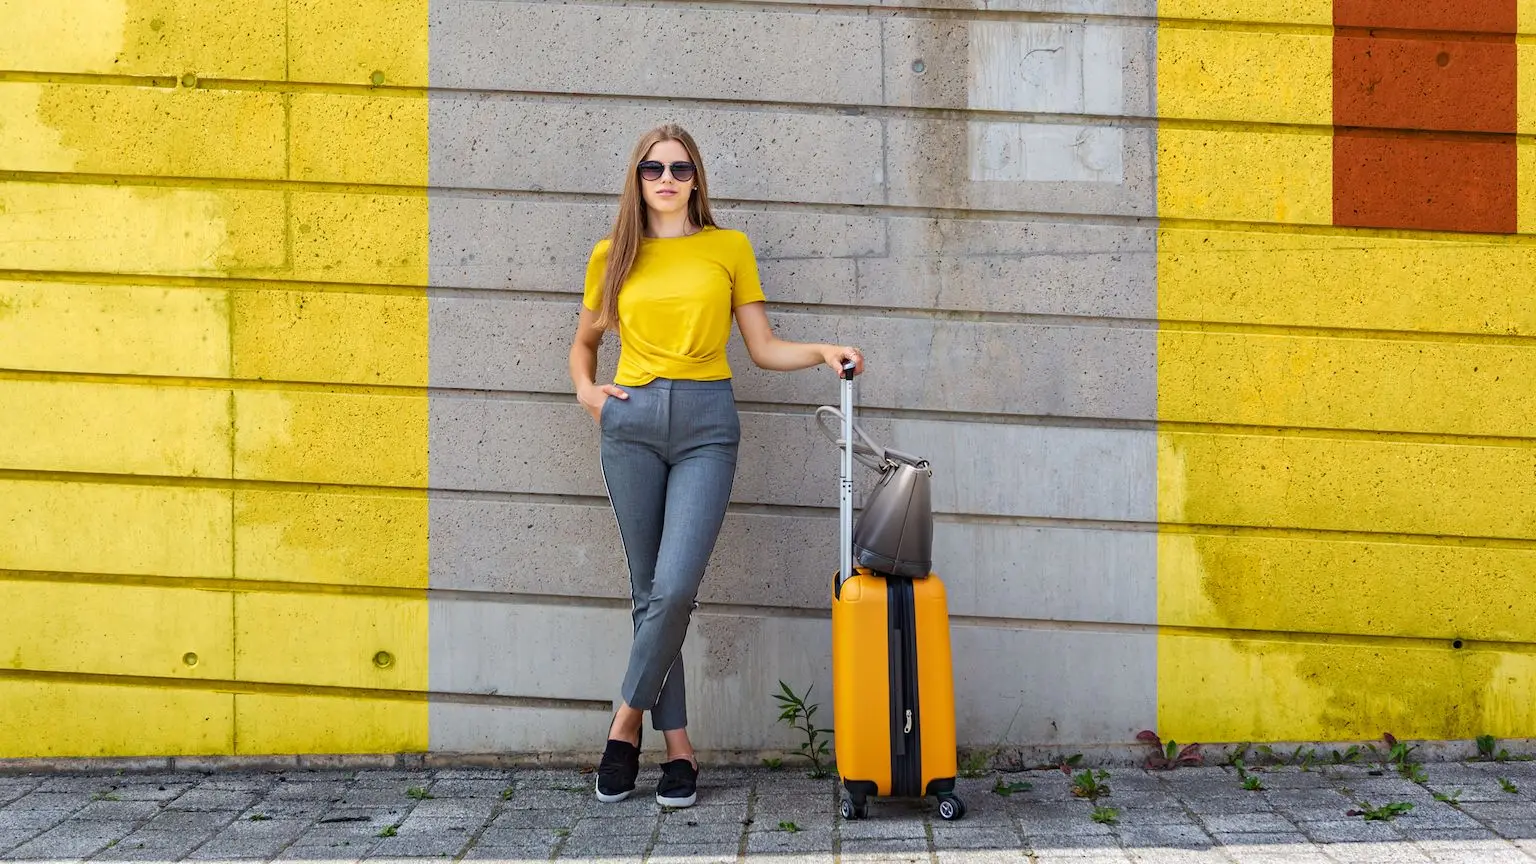 Woman wearing a yellow t-shirt standing with a yellow suitcase in front of a yellow painted wall